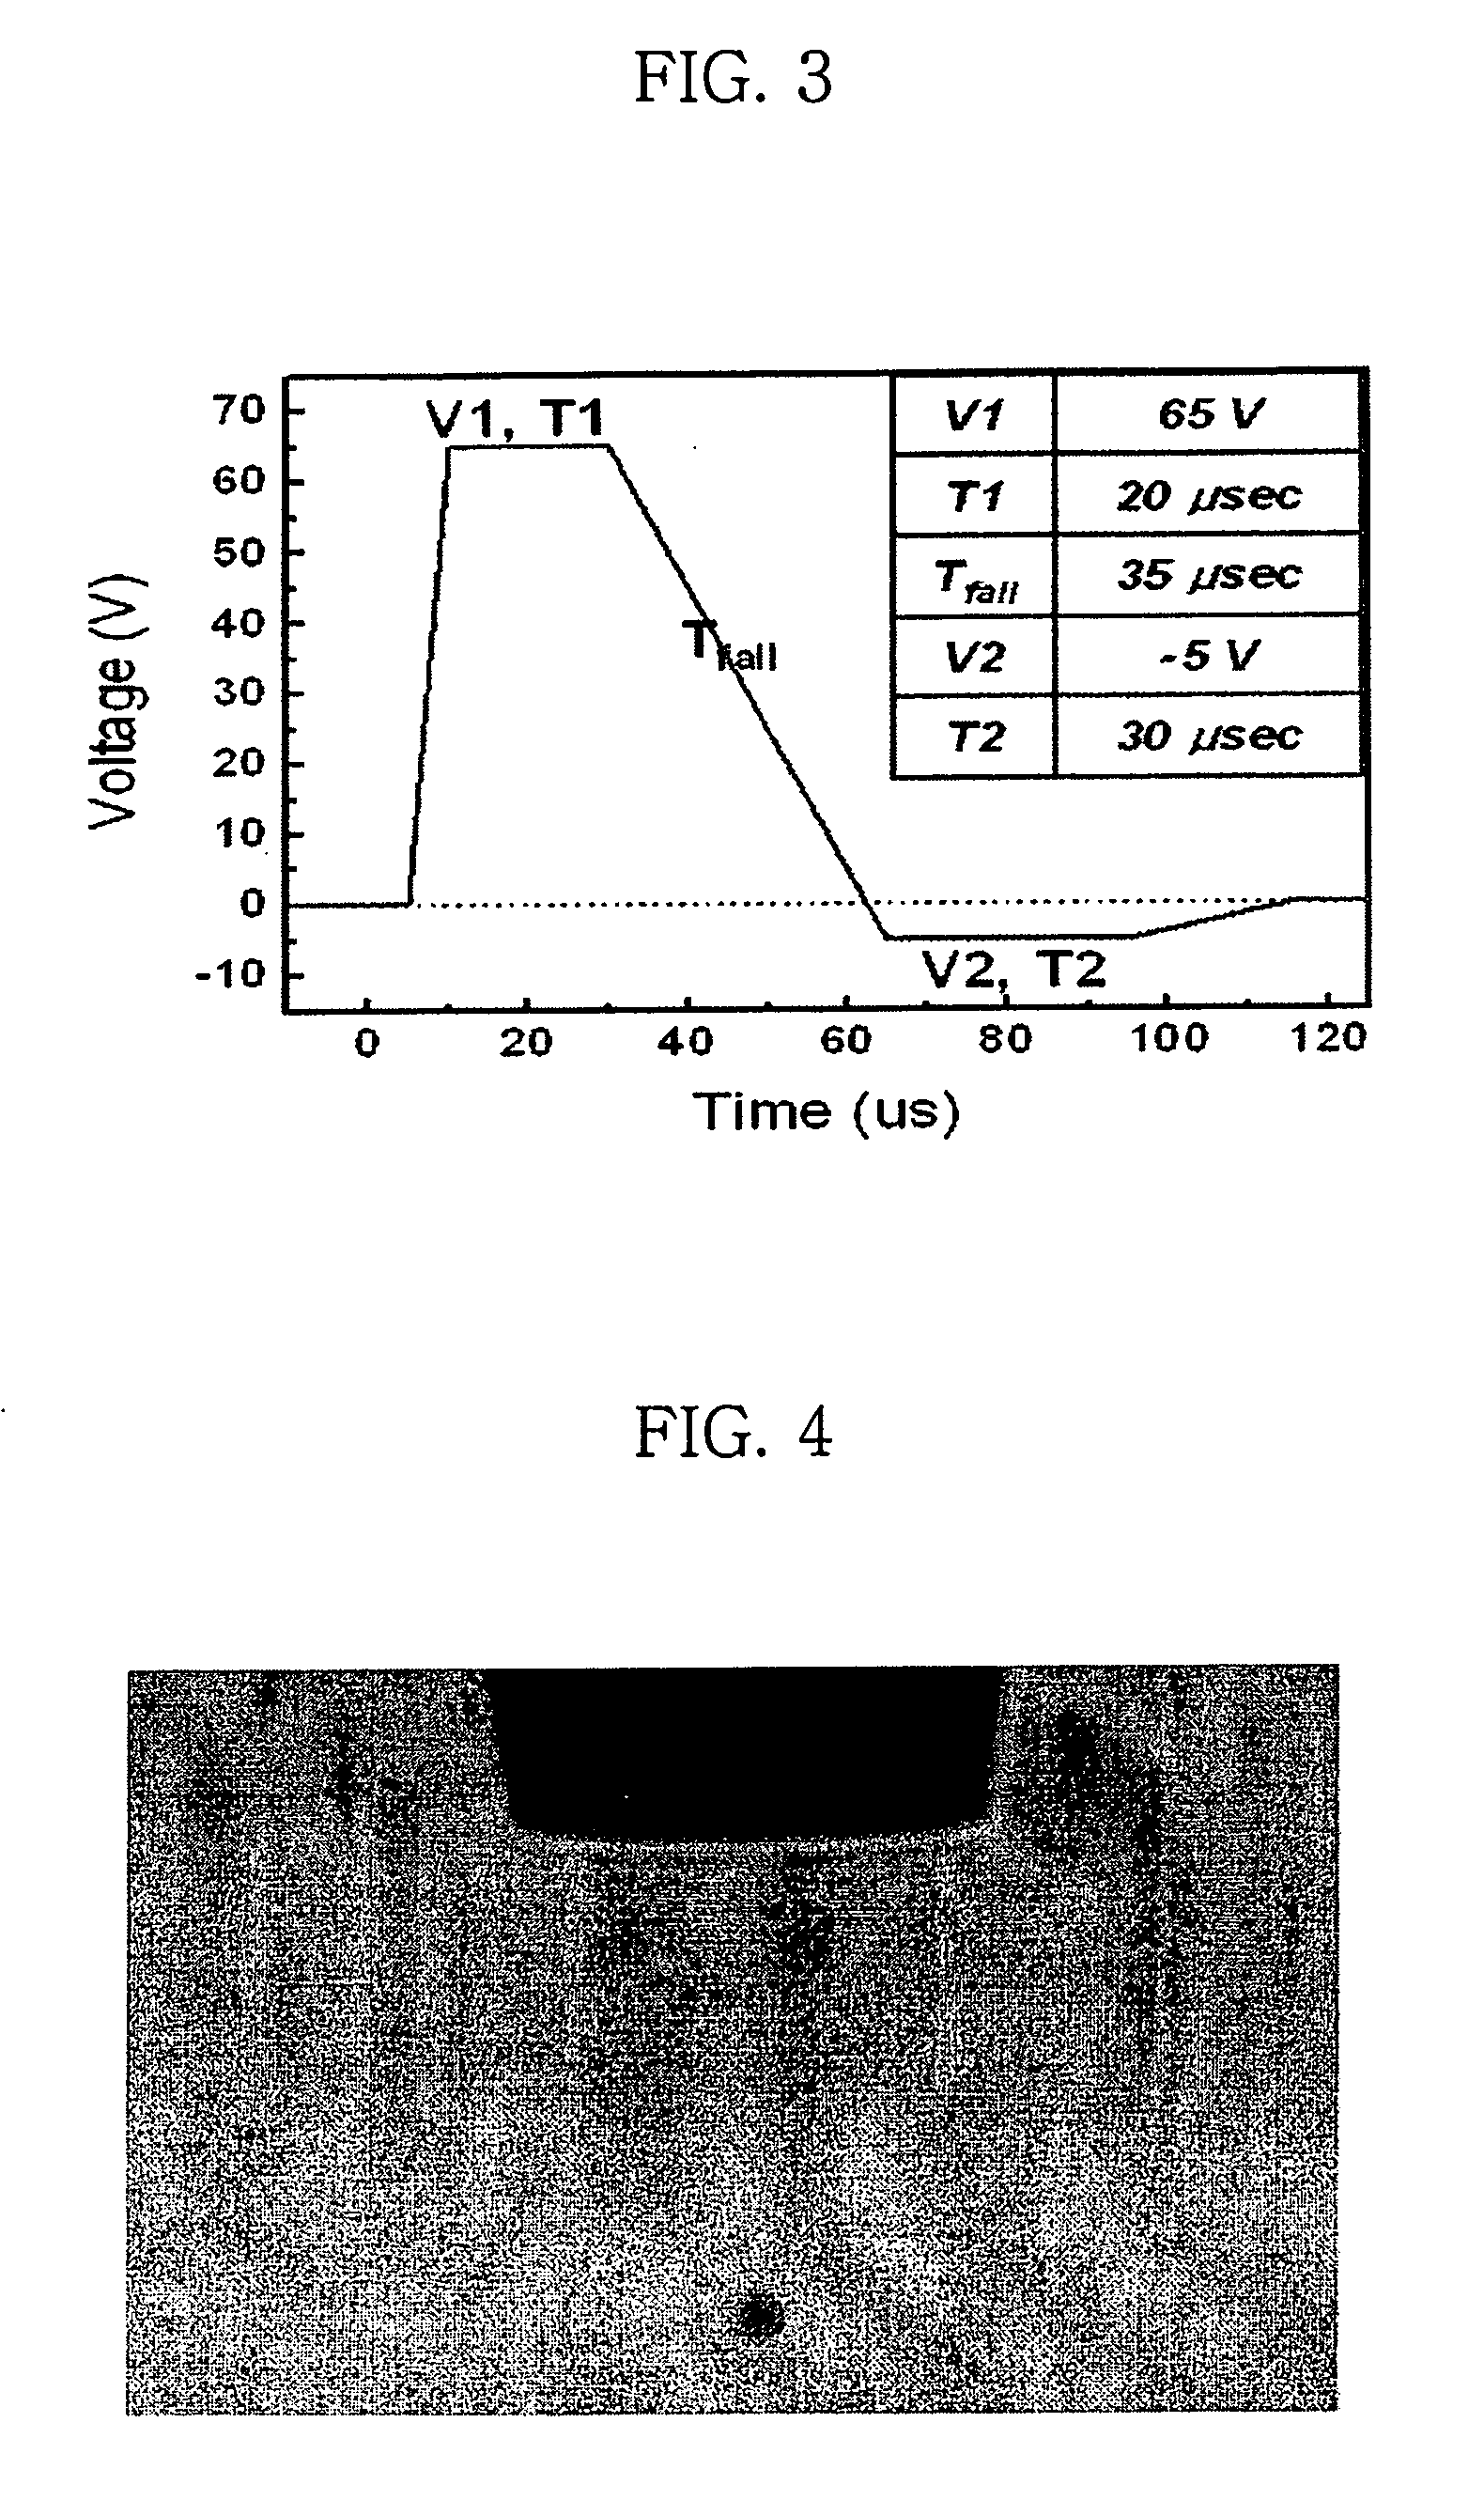 Conductive ink composition and method of forming a conductive pattern using the same